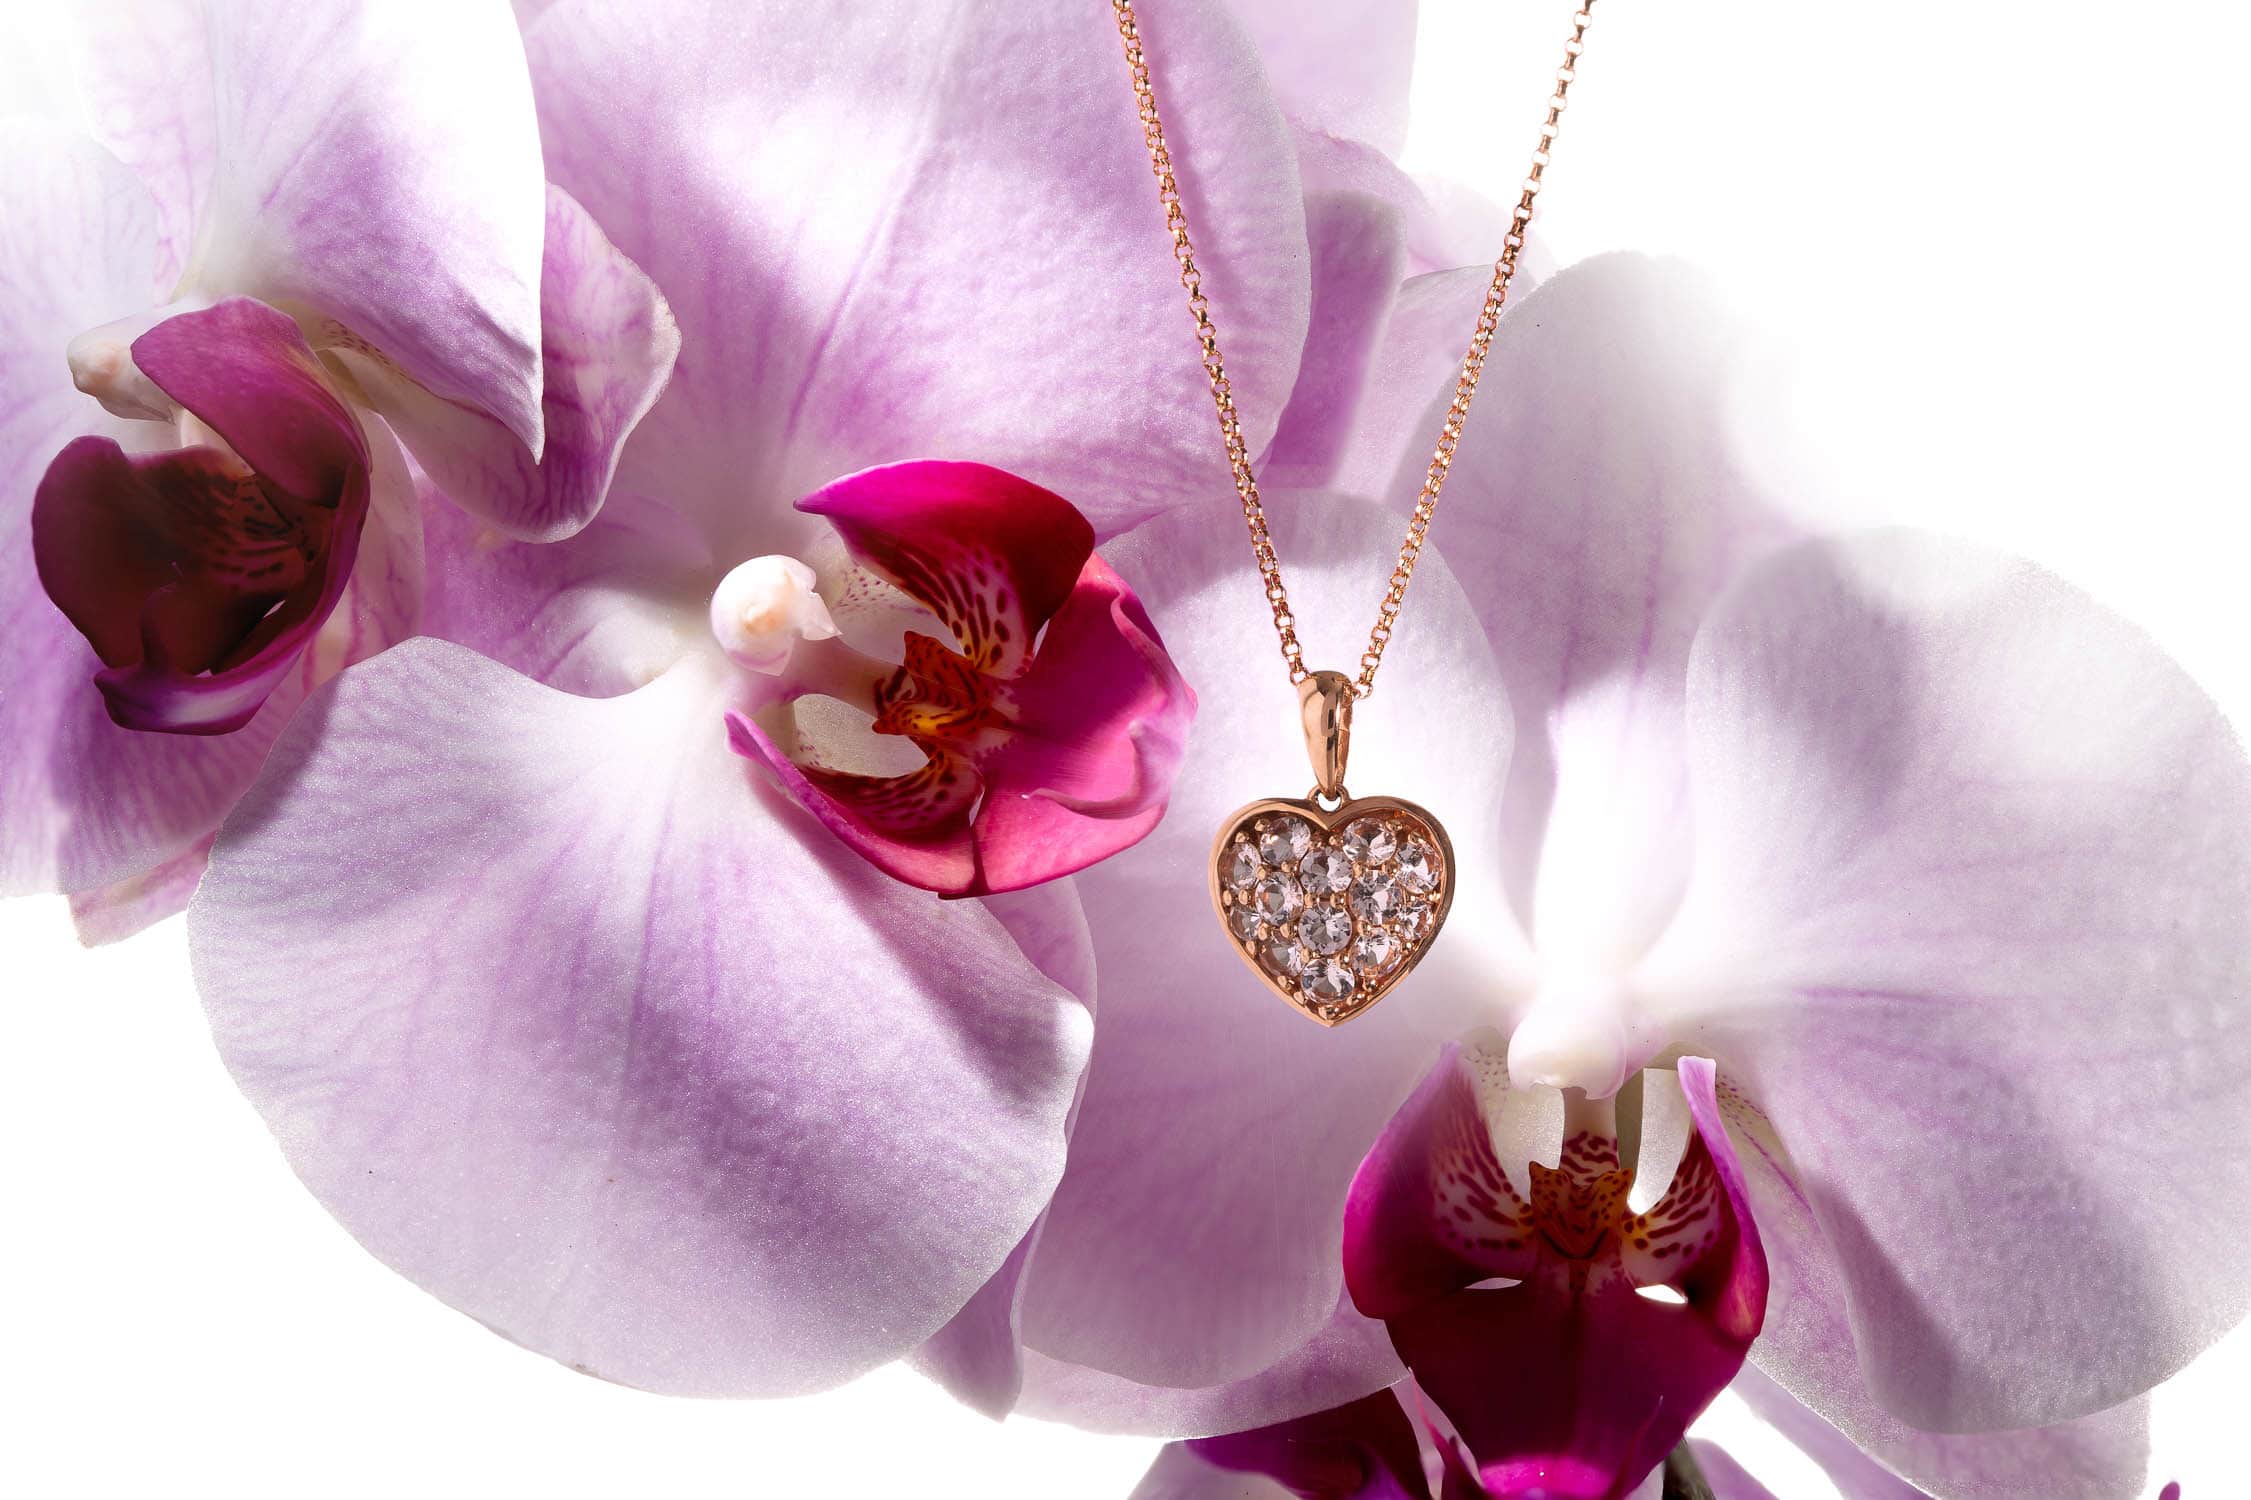 Jewelry Photography Lighting - Gold Pendant and The Orchid